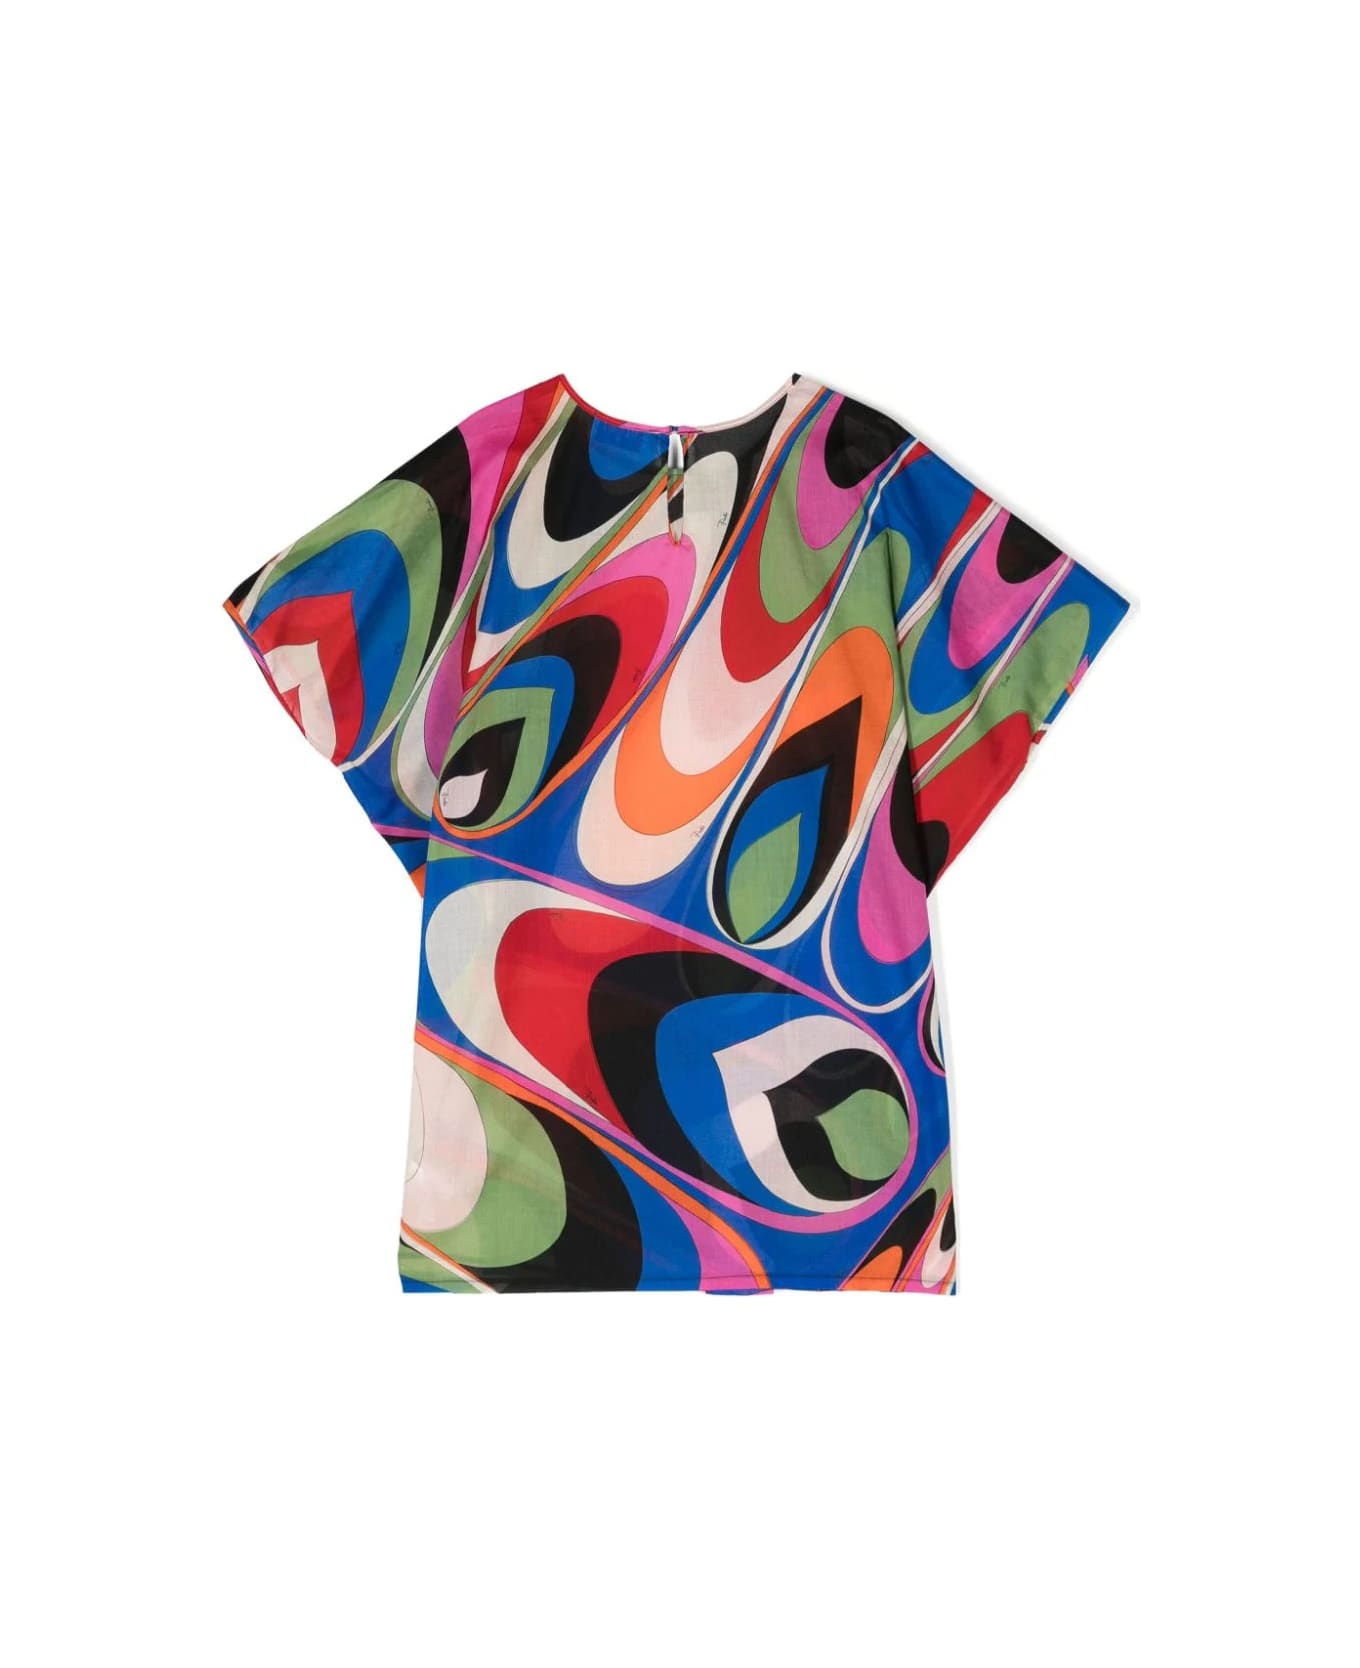 Pucci Multicoloured Wave Print Short Sleeved Dress - Multicolour